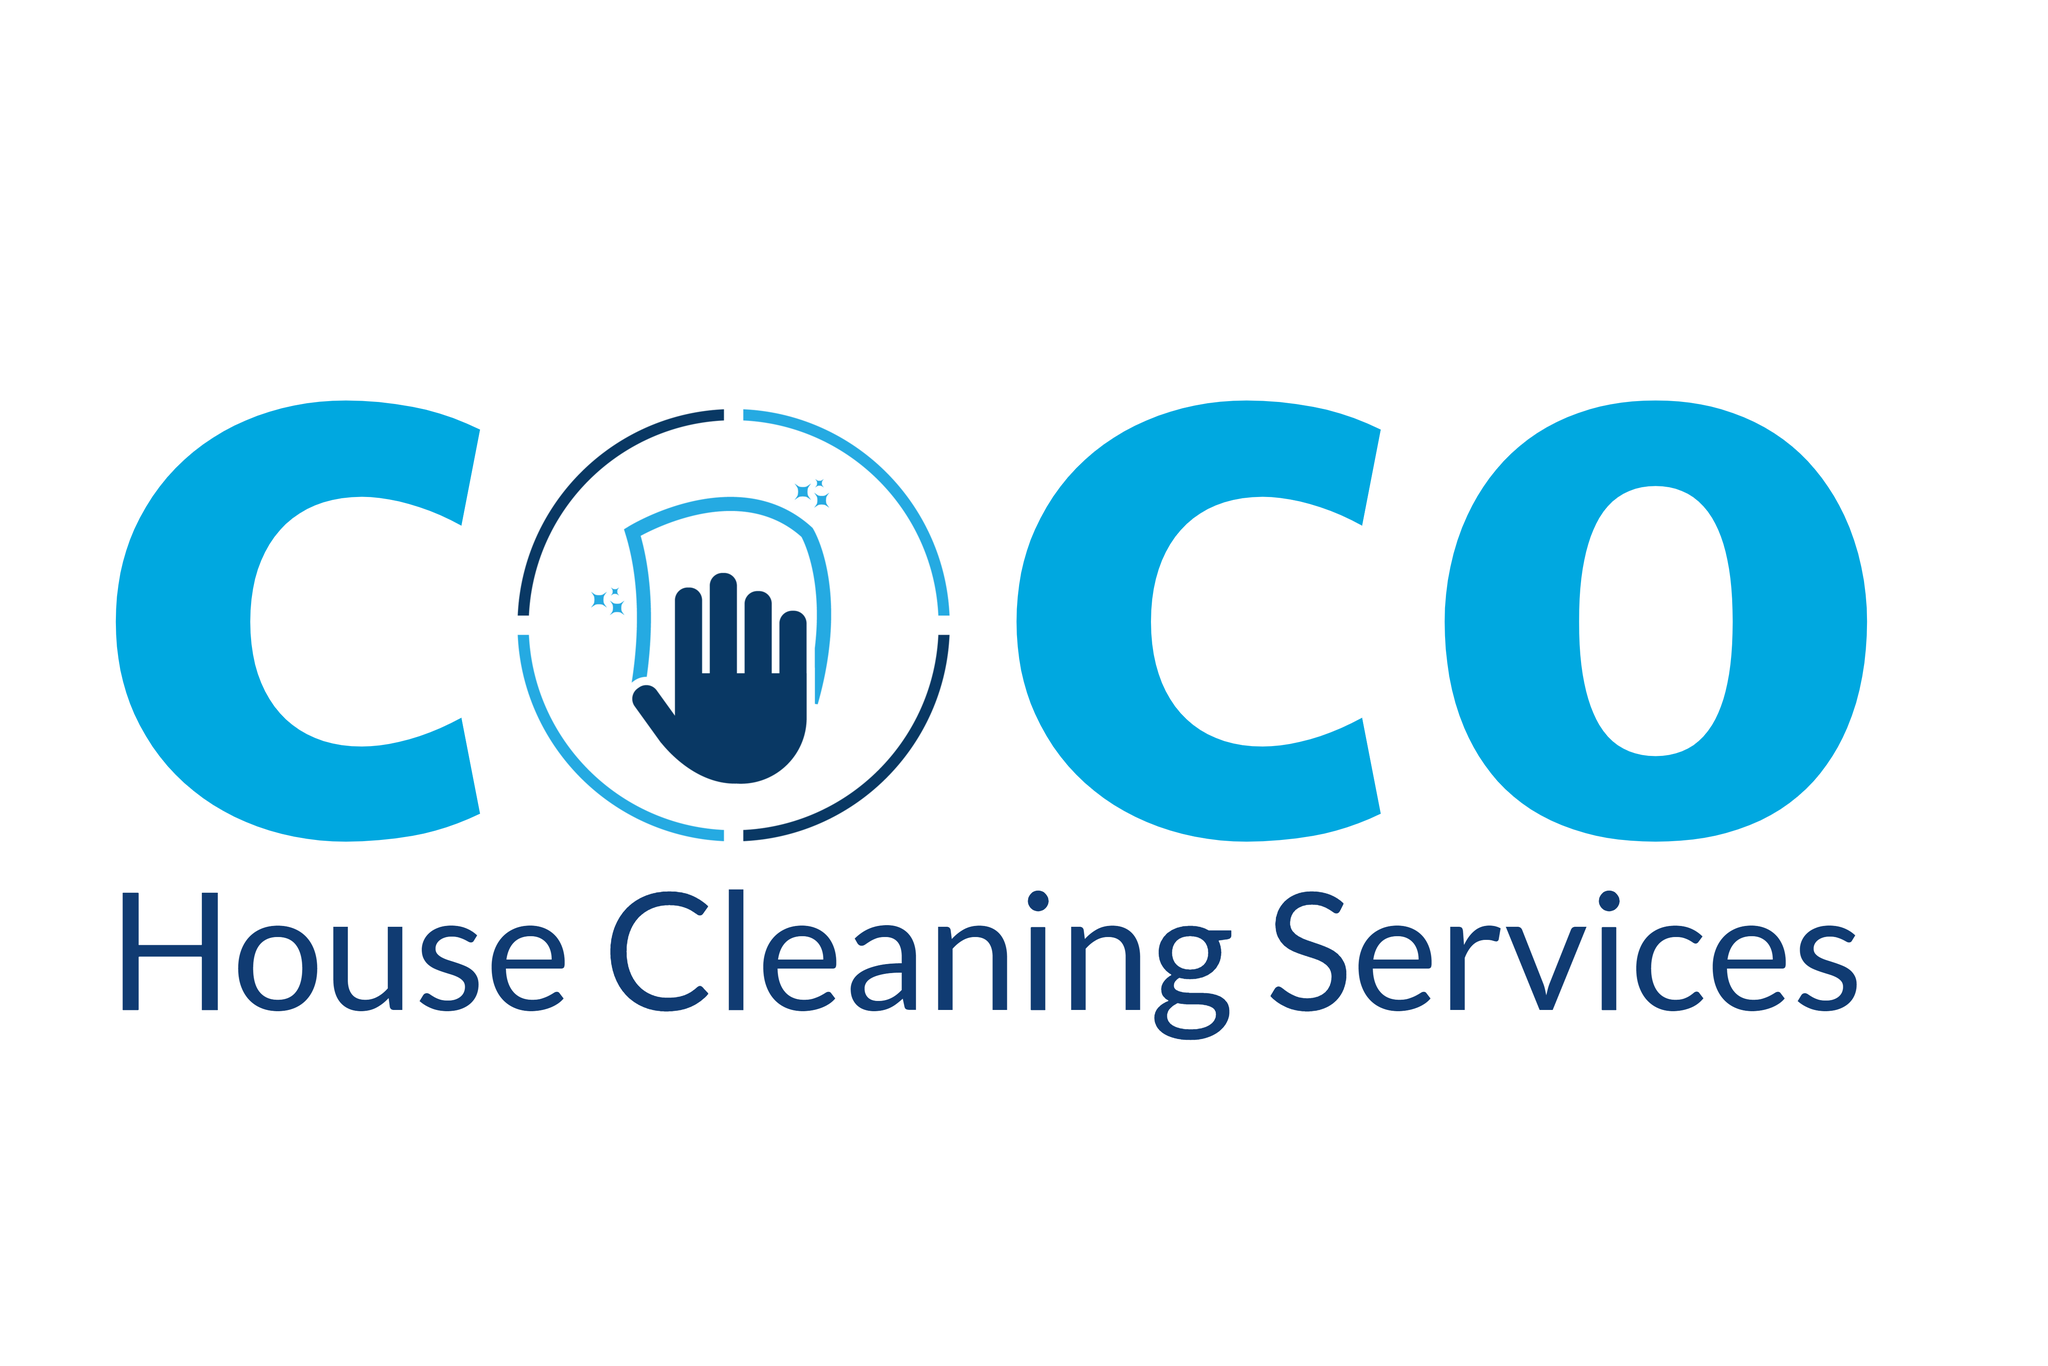 Coco’s House Cleaning